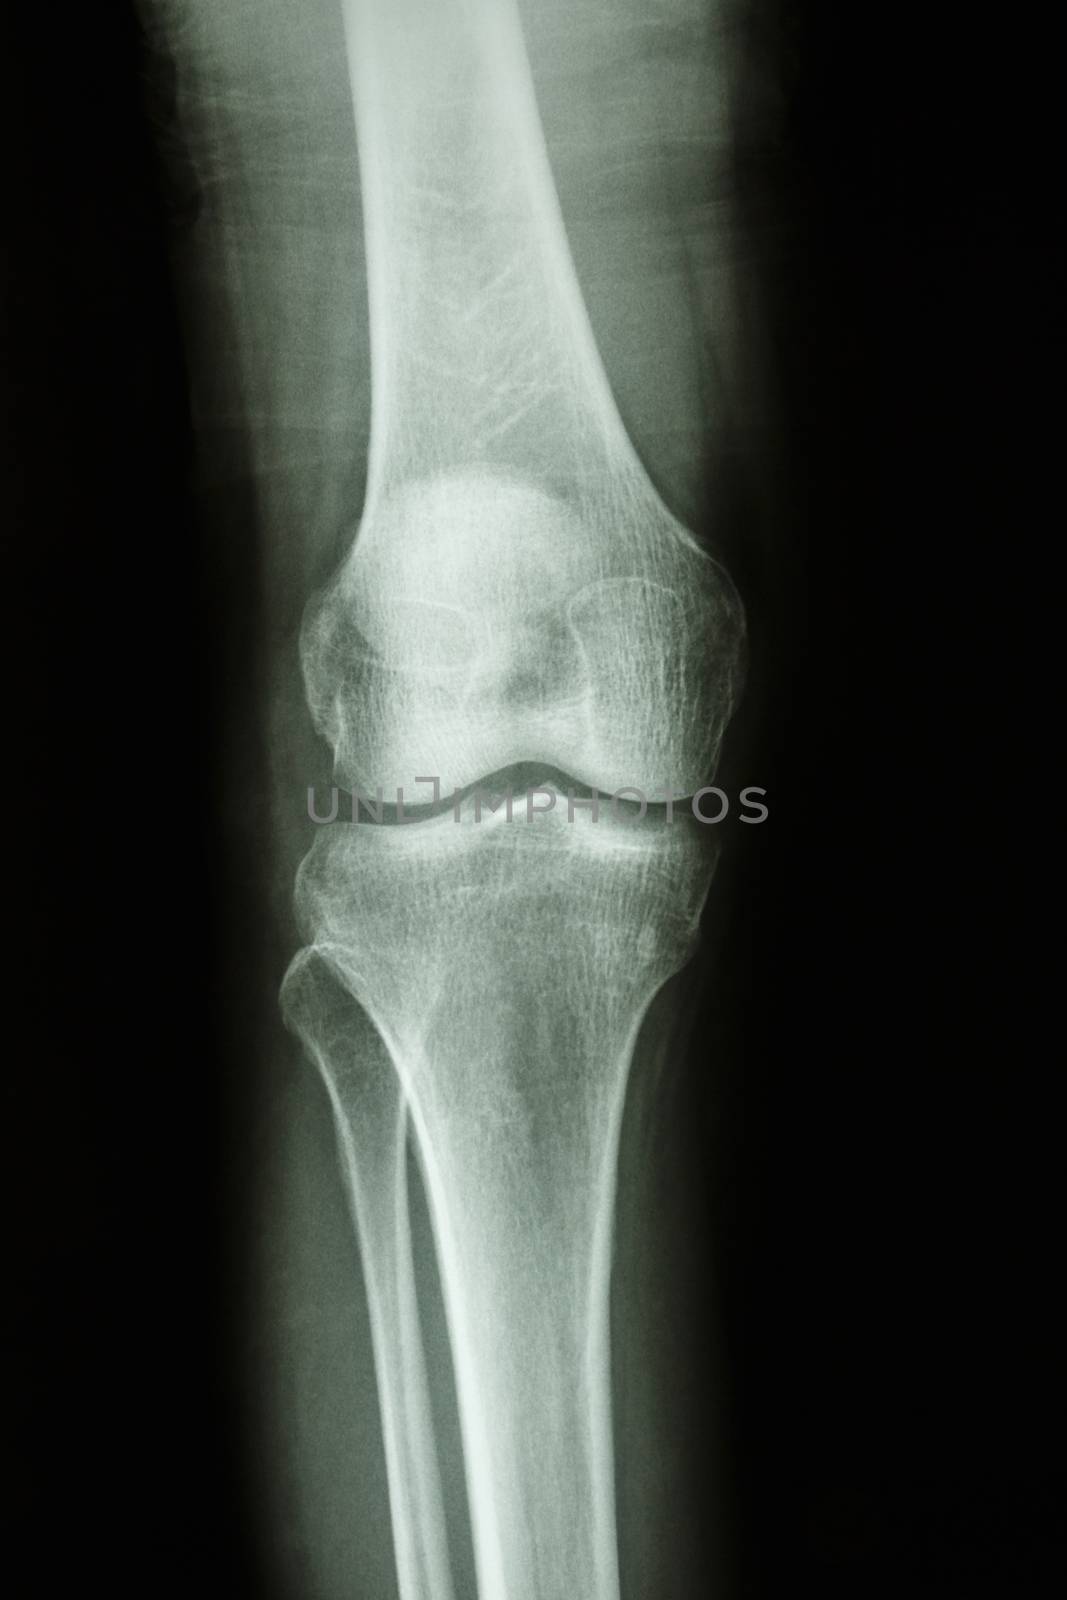 normal human's knee joint by stockdevil